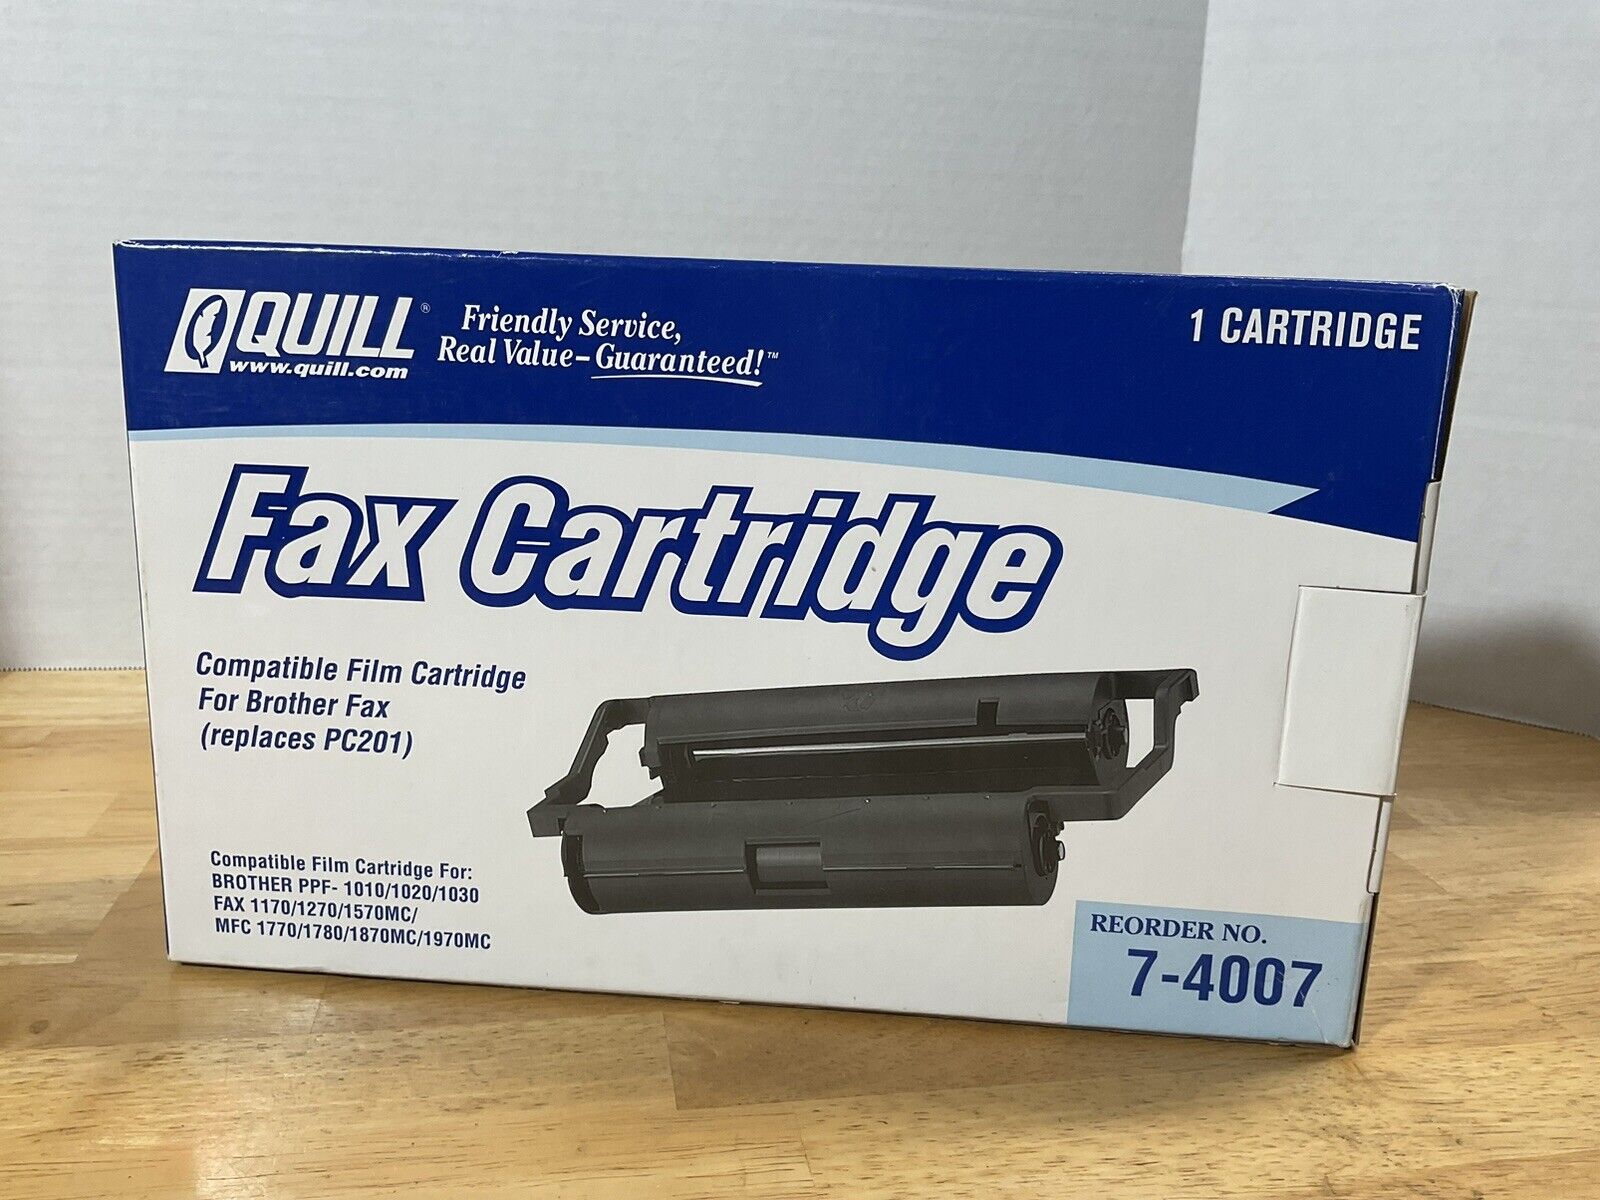 Quill Fax Cartridge  7-4007 “NEW”